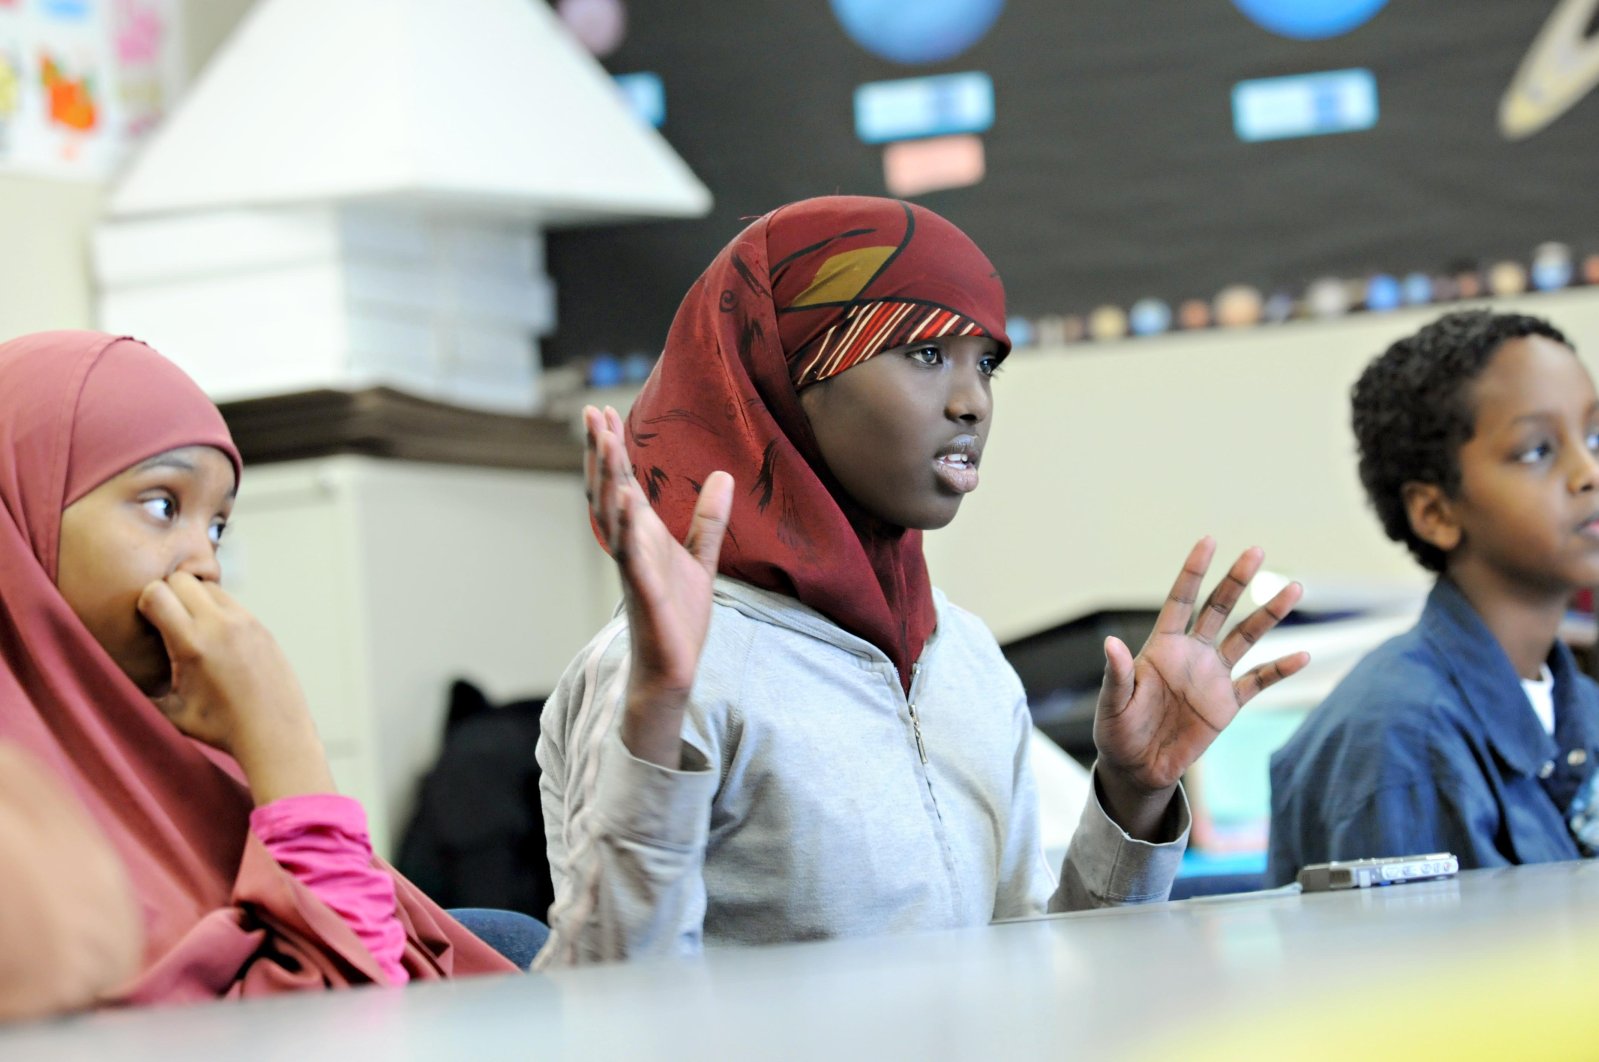 Fartun Arale, center, shares stories about her family, Somali culture and history with her classmates Halima Jama, 13, left, and Mohamud Mohamed at MInnesota International Middle School in Minneapolis, a charter school that enrolls mostly East African students, Jan. 6, 2010. (AP File Photo)